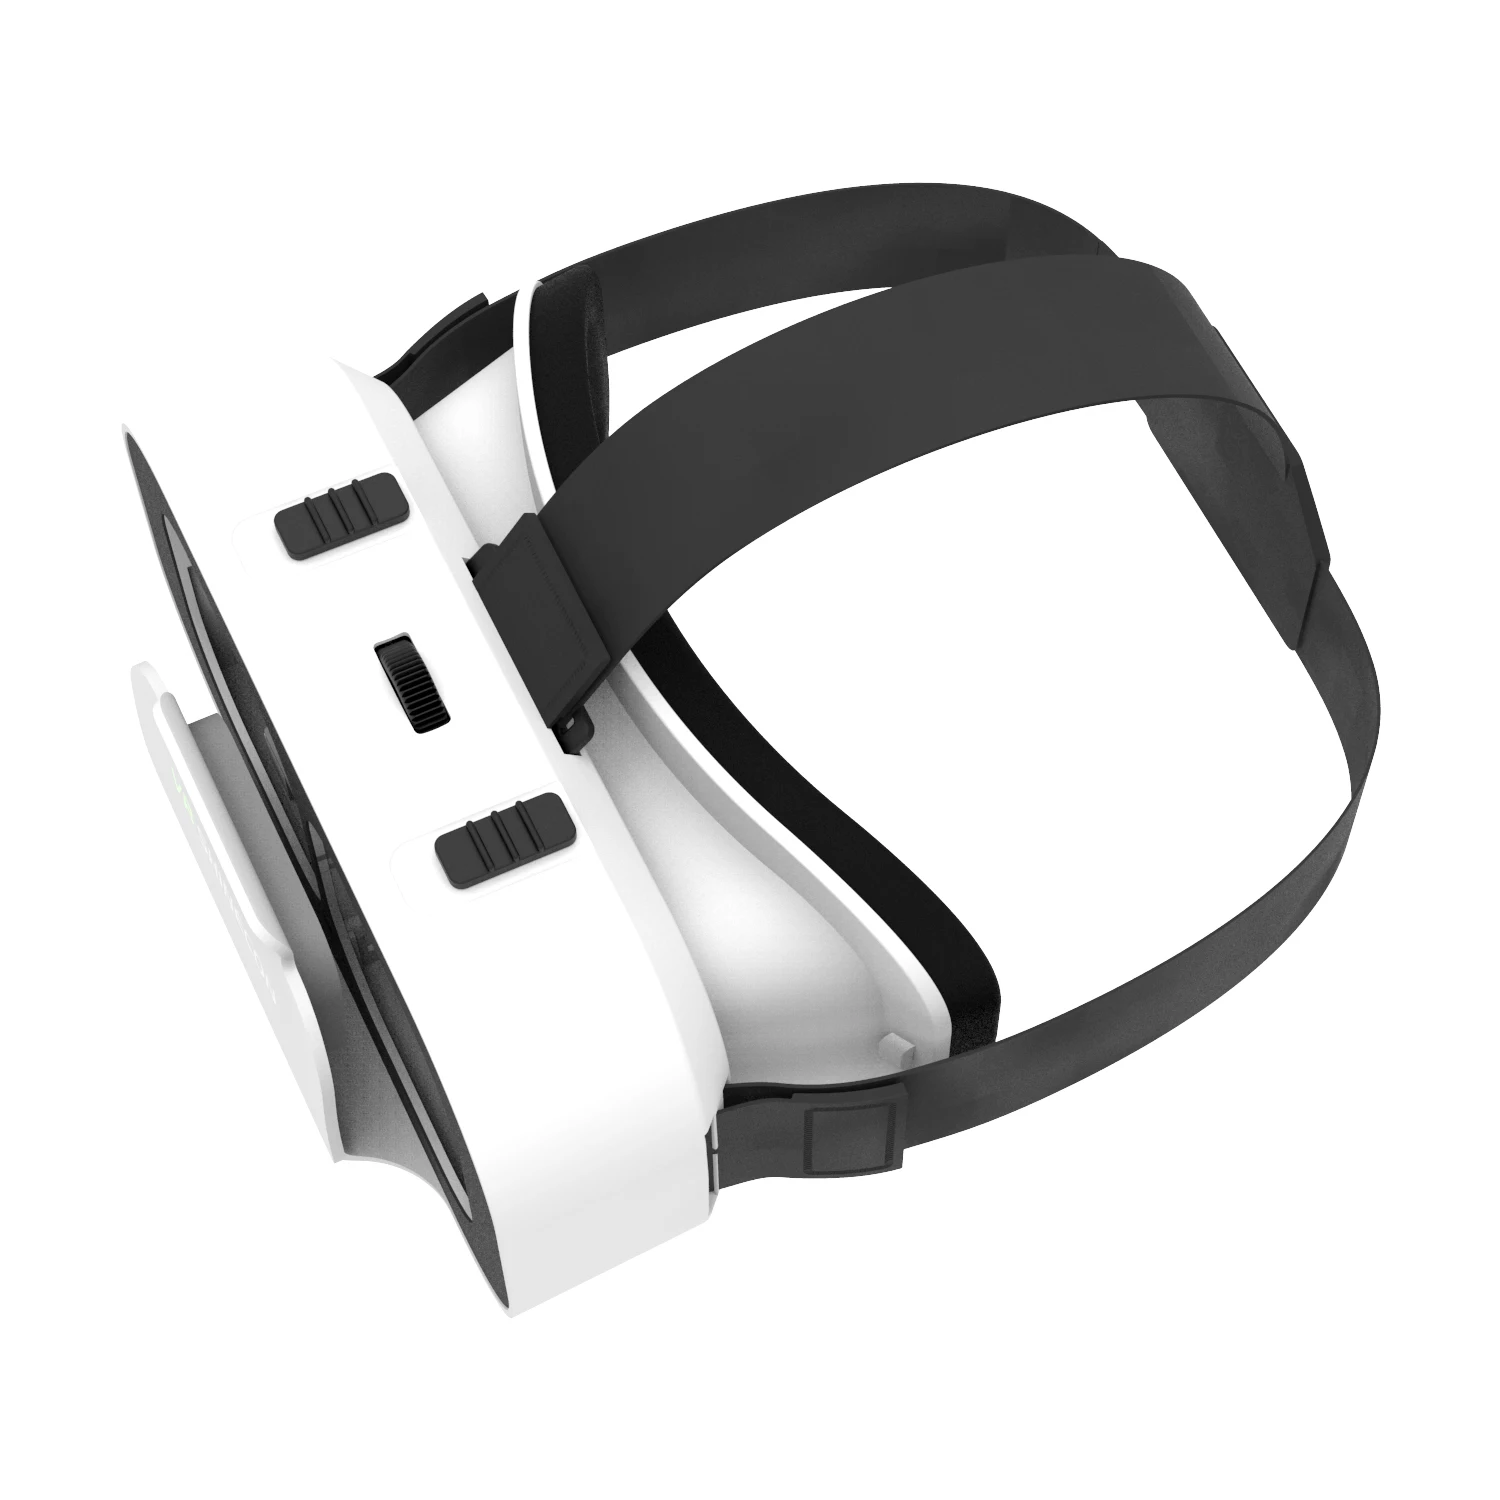 

Zooming VR SHINECON G05A 3D VR Glasses Headset VR Virtual Reality for 4.7-6.0 inches Android iOS Smart Phones 3D Glasses